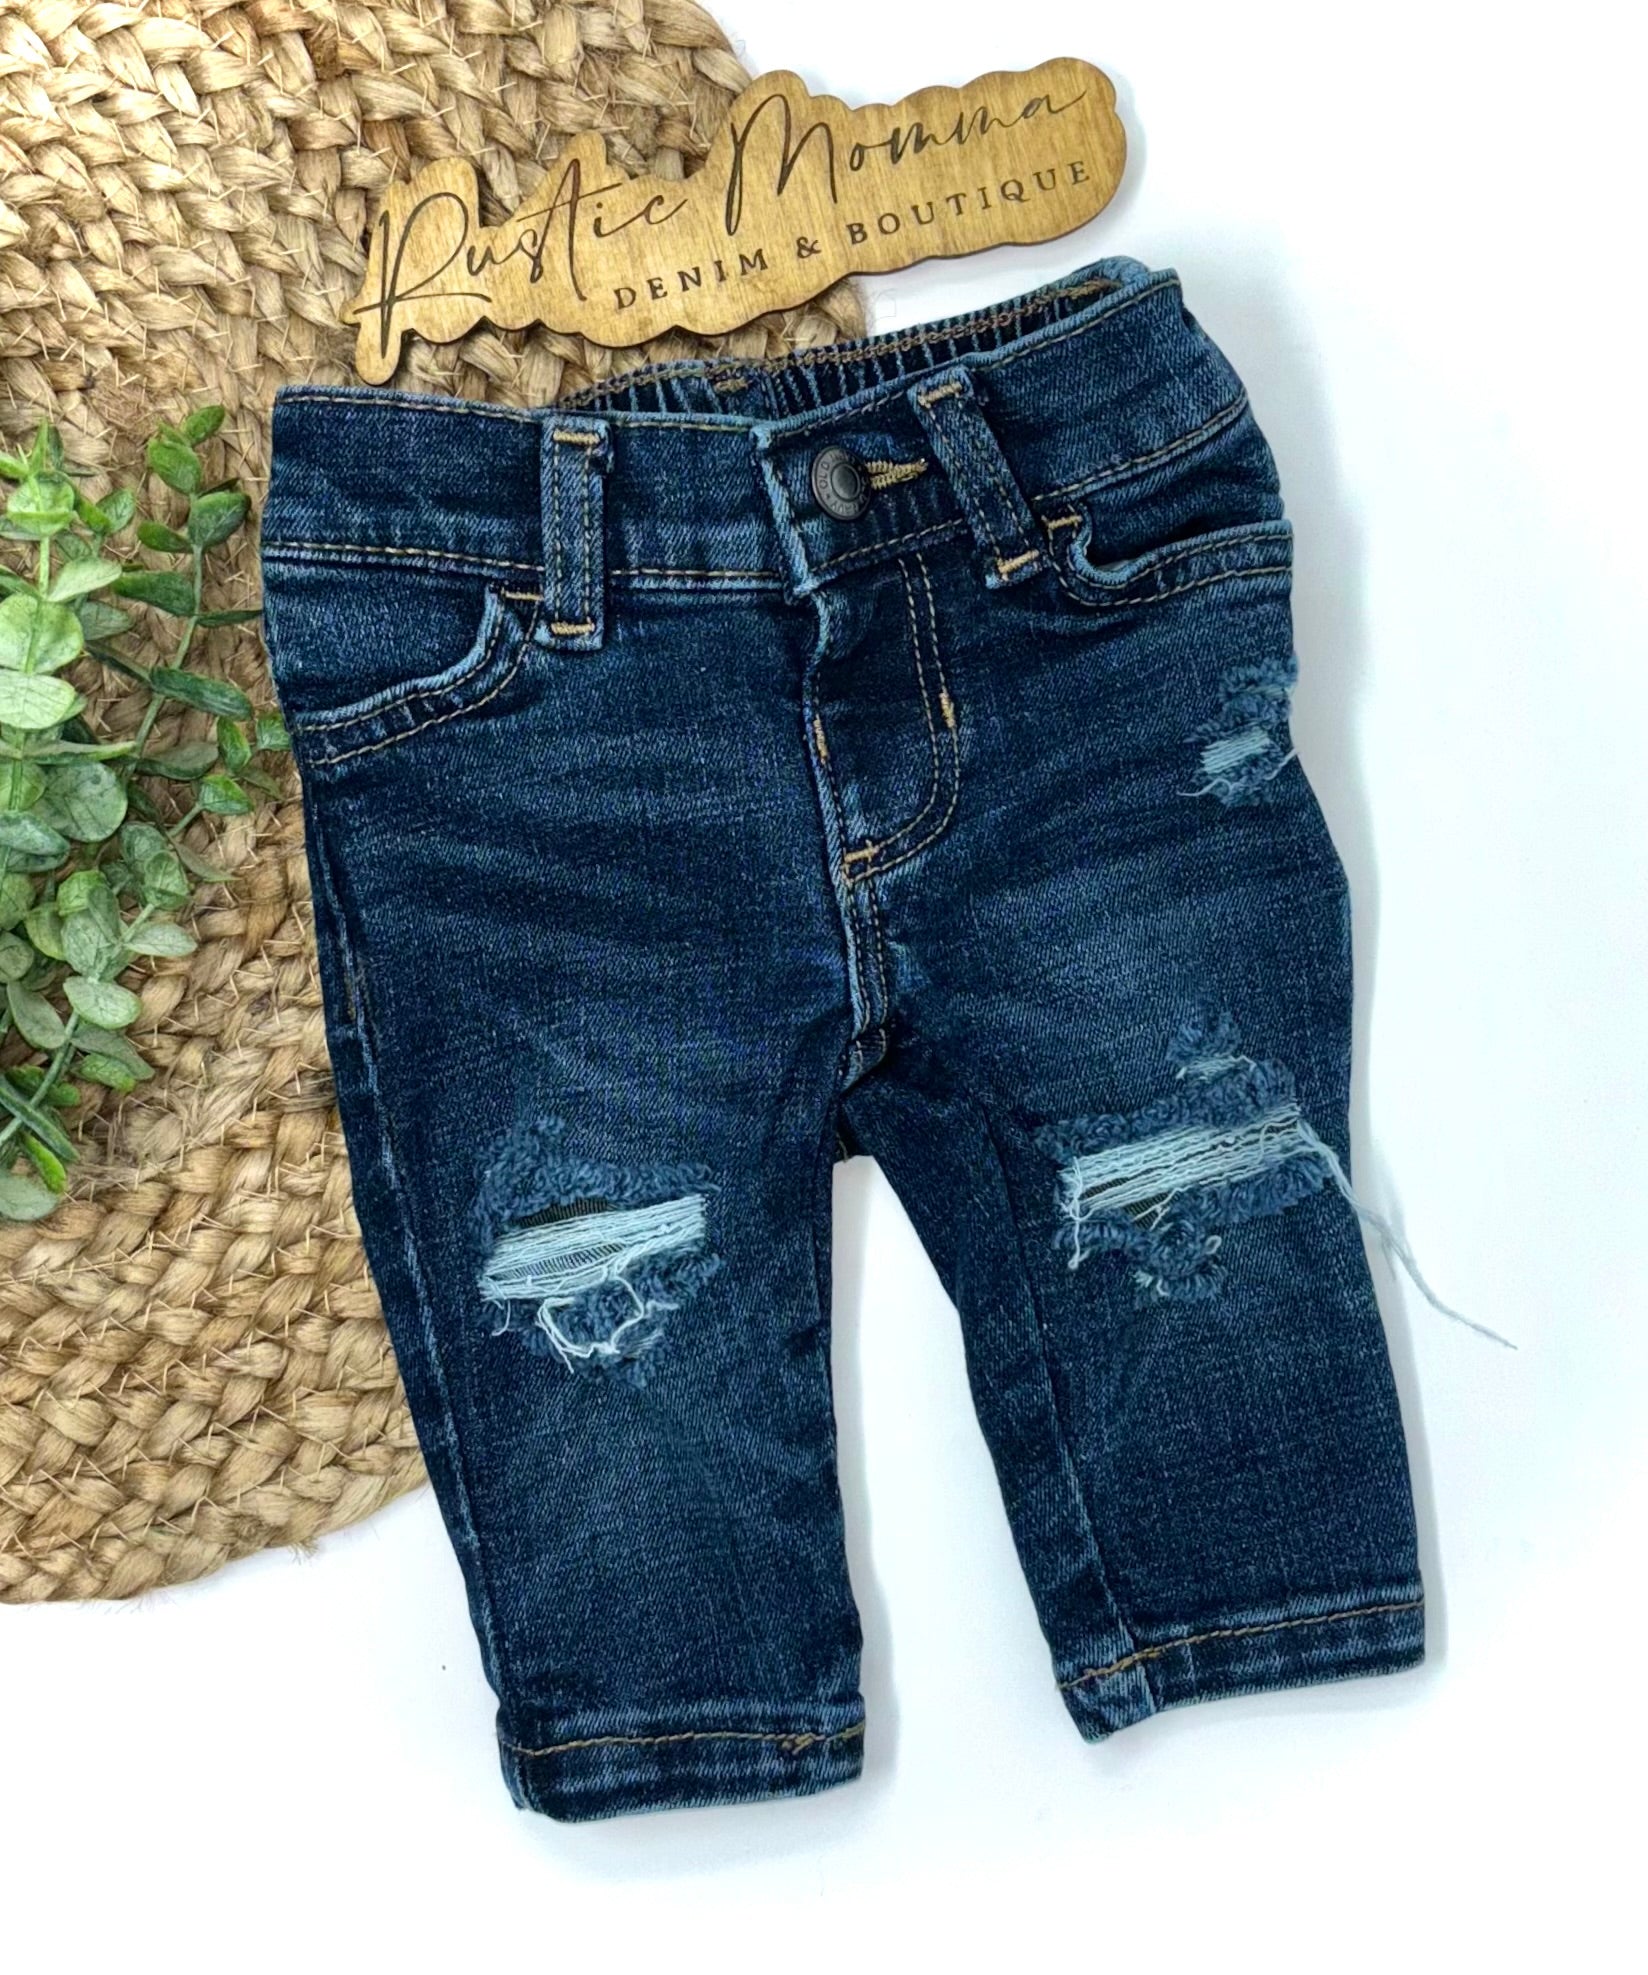 0/3 months •  Distressed Jeans